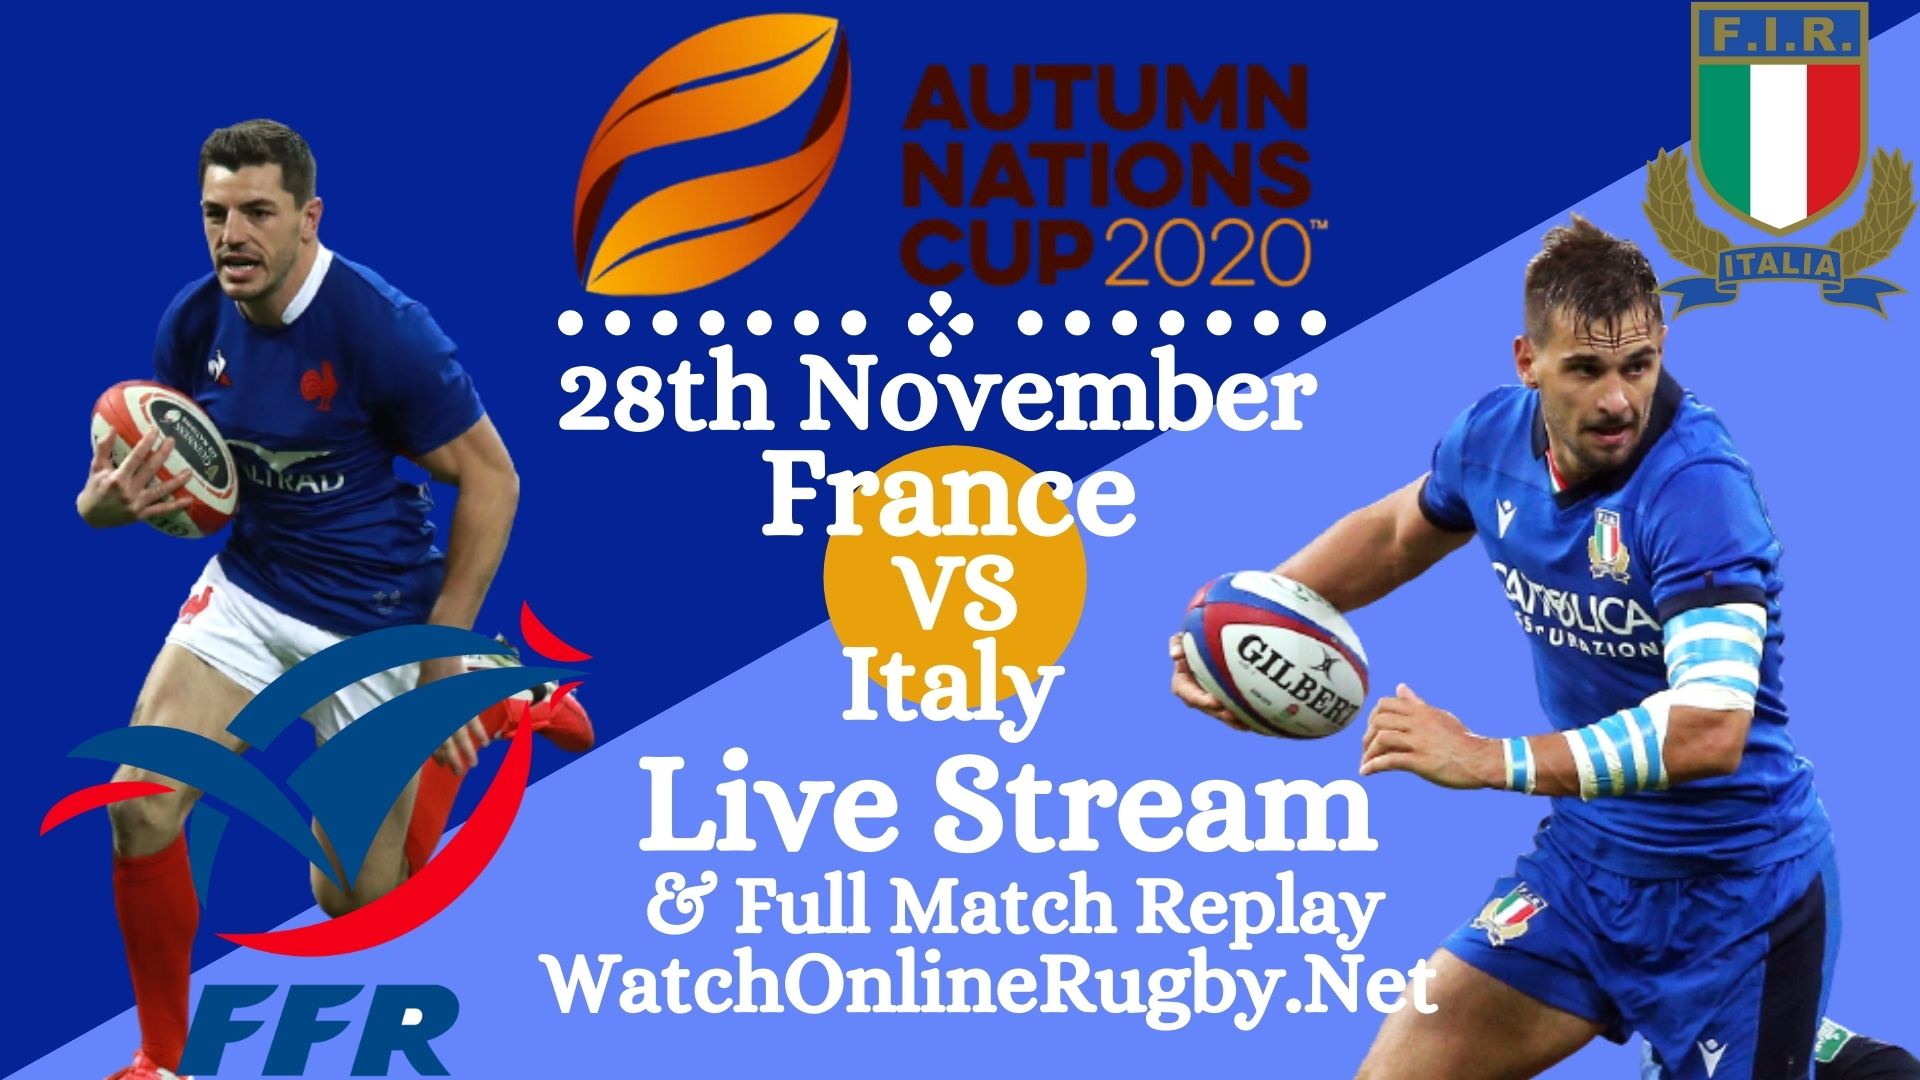 Italy vs France 2023 Live Stream RD 1 Six Nations Full Match Replay